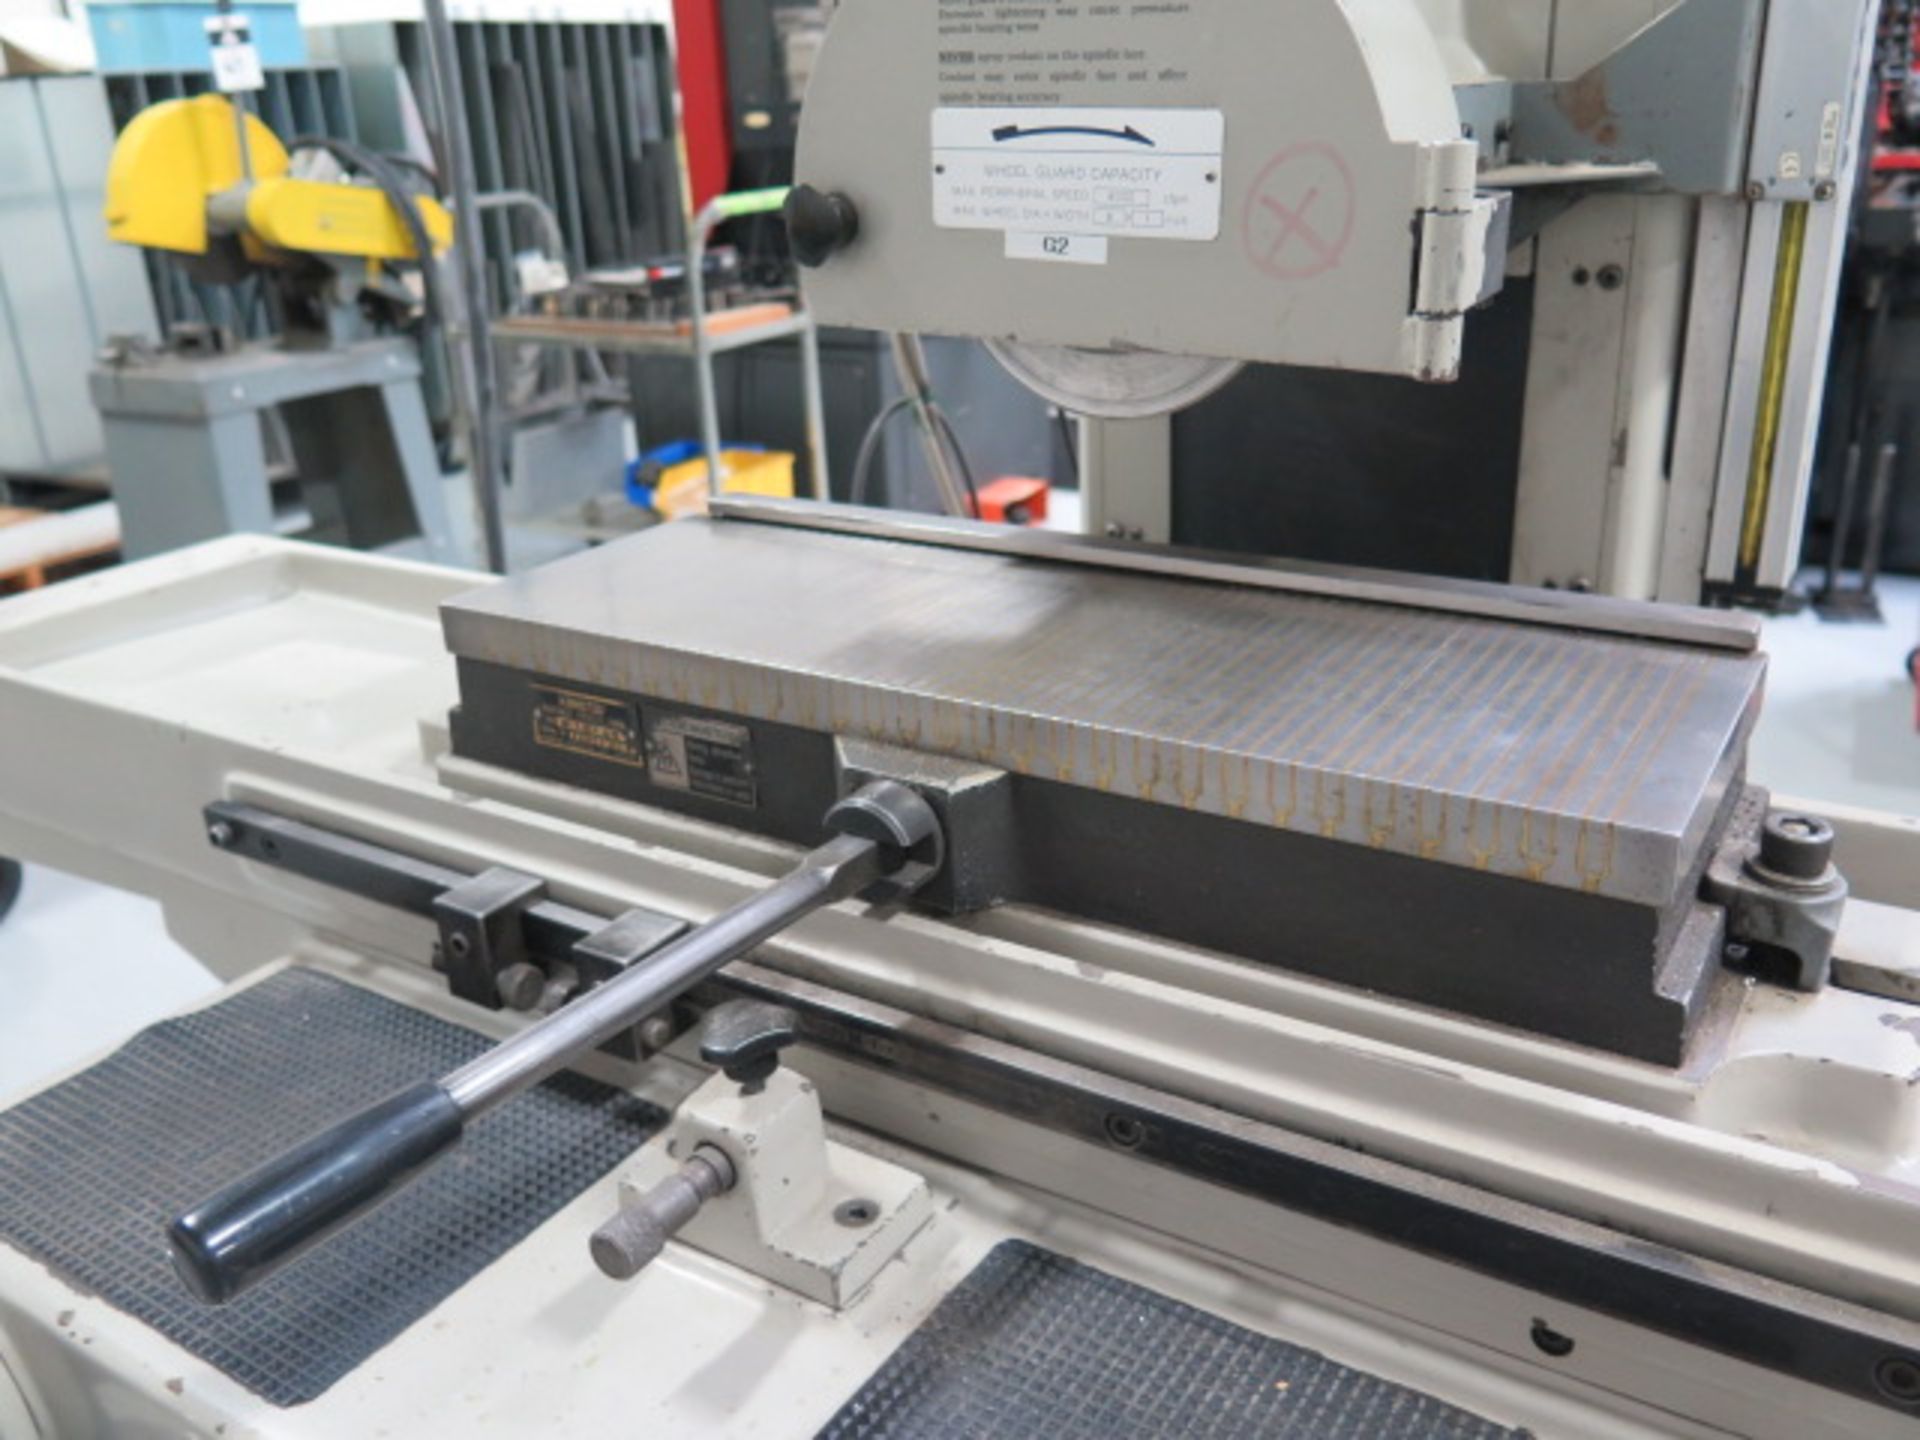 Okamoto “6-18 LINEAR” 6” x 18” Surface Grinder s/n 4469 w/ Mitutoyo UDR-220 Program DRO, SOLD AS IS - Image 8 of 15